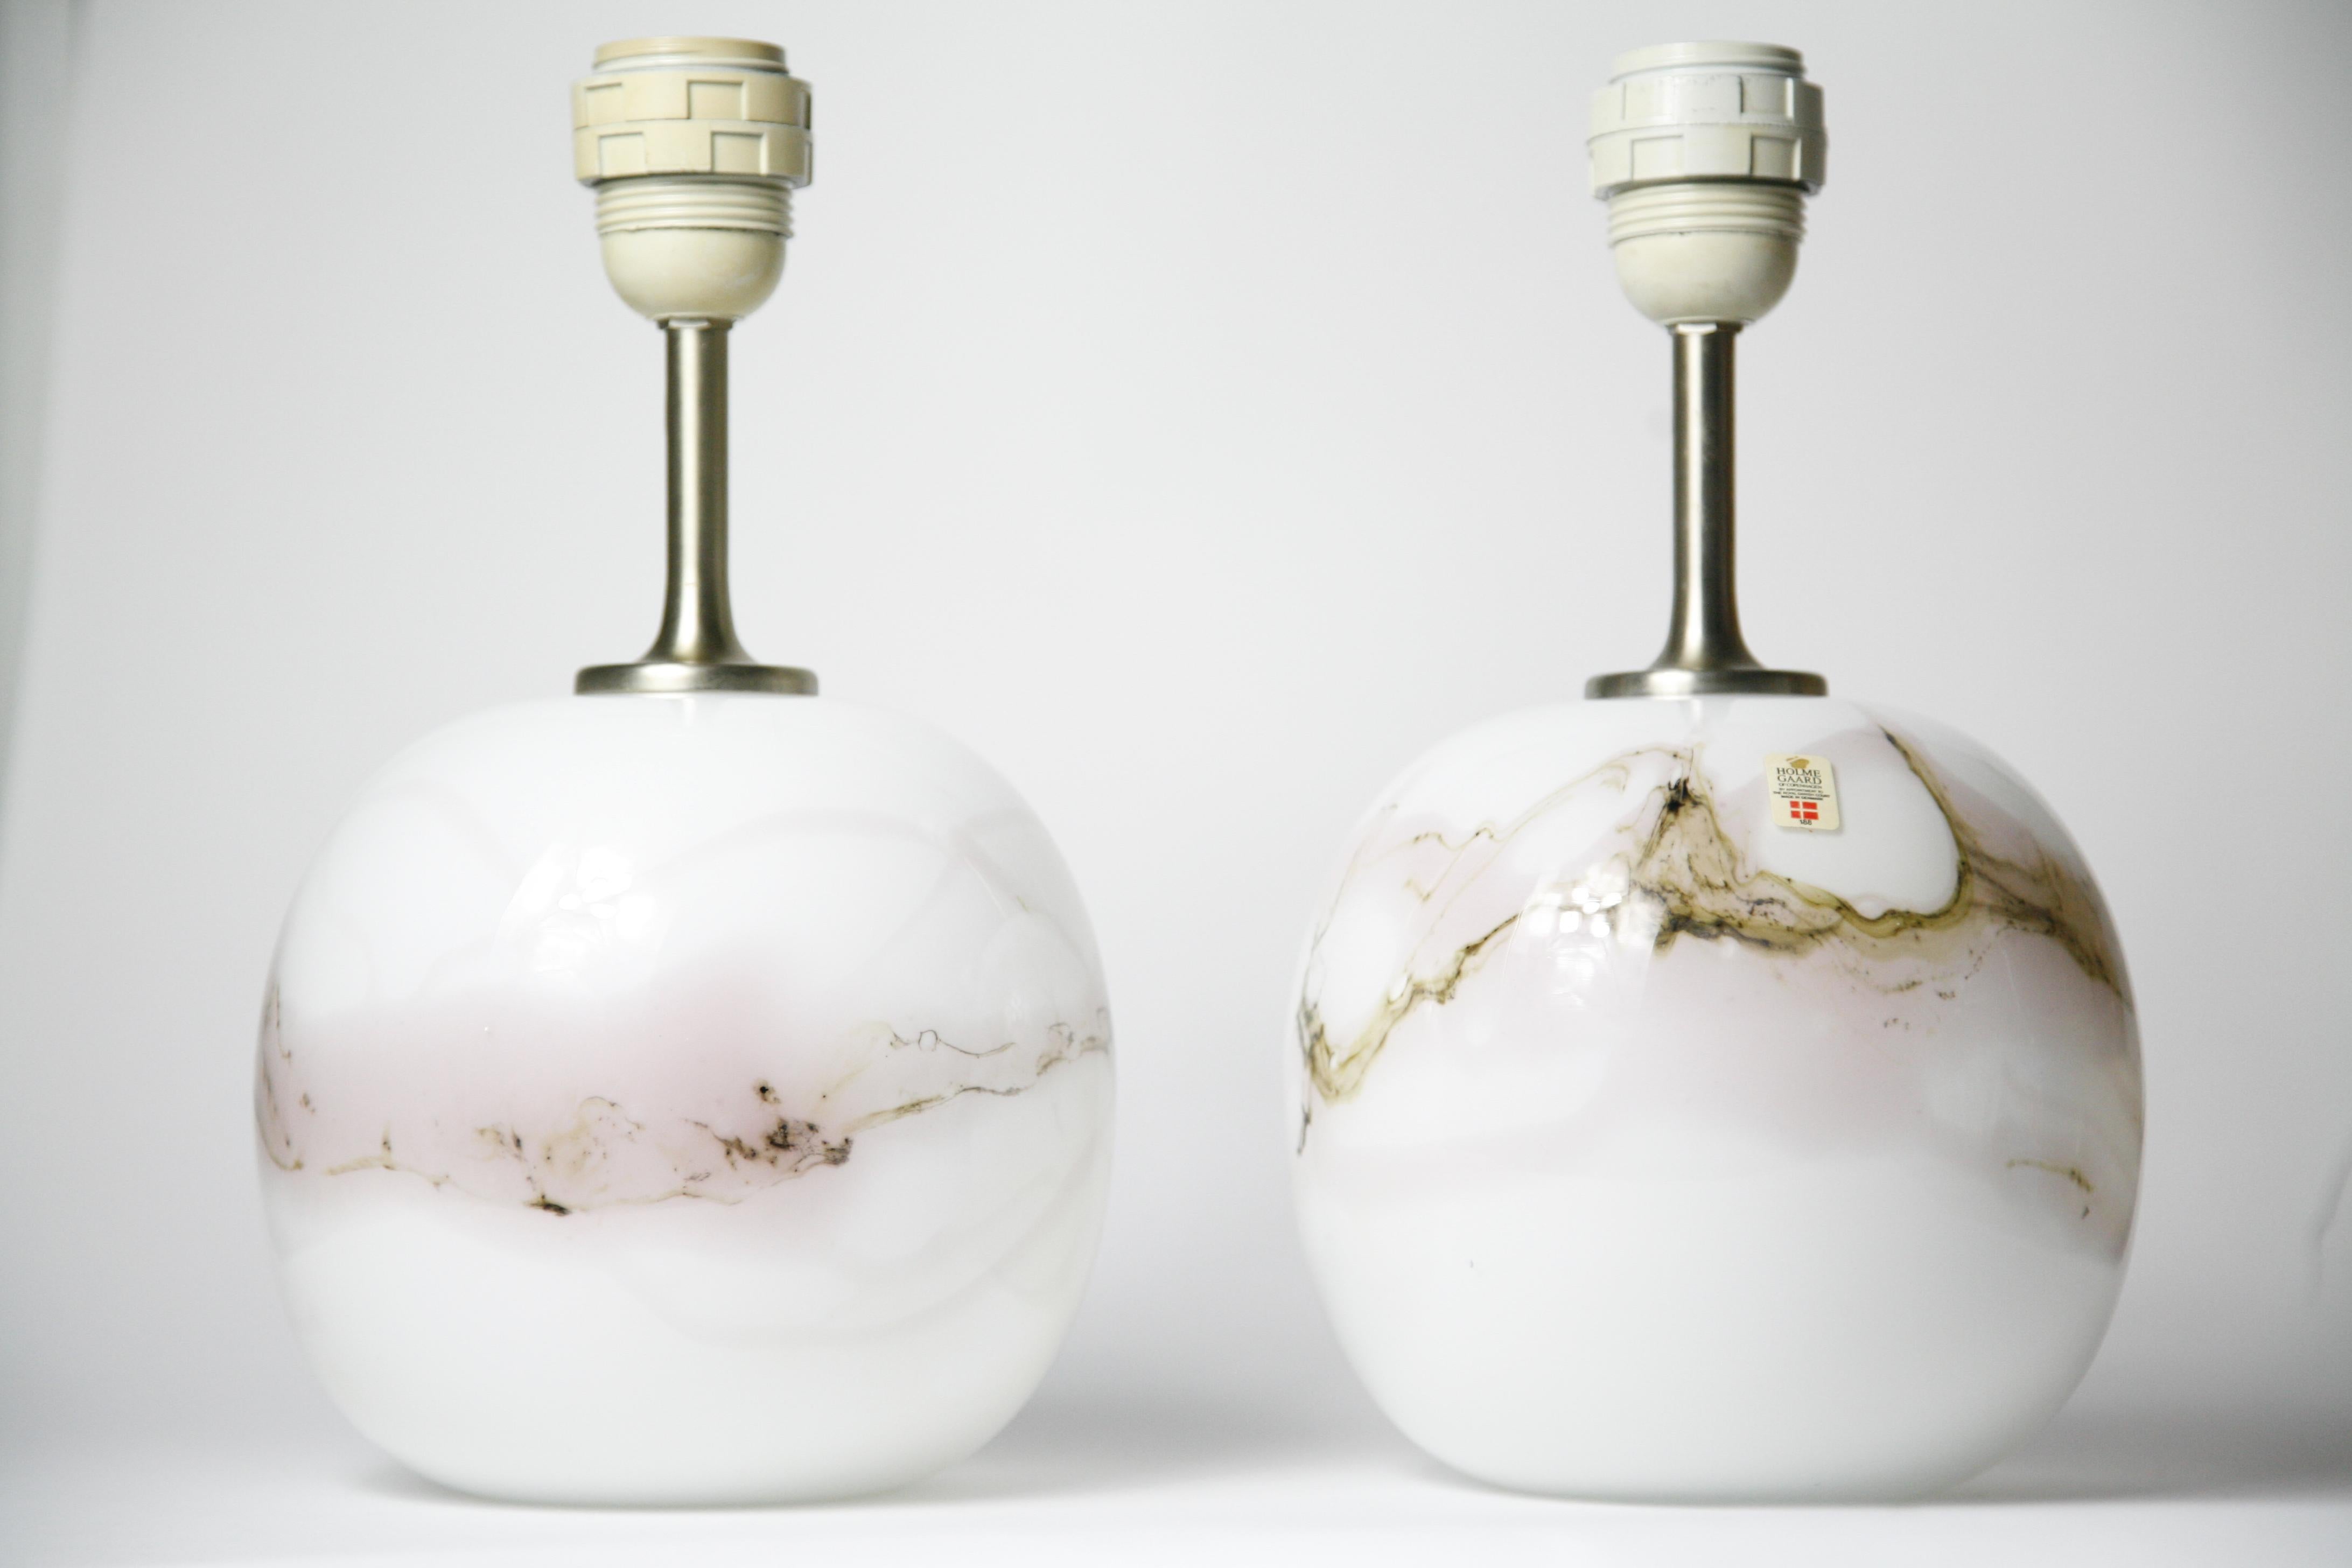 Two Holmegaard Lamps Sakura Design Michael Bang, 1984, Denmark In Good Condition For Sale In Bronx, NY